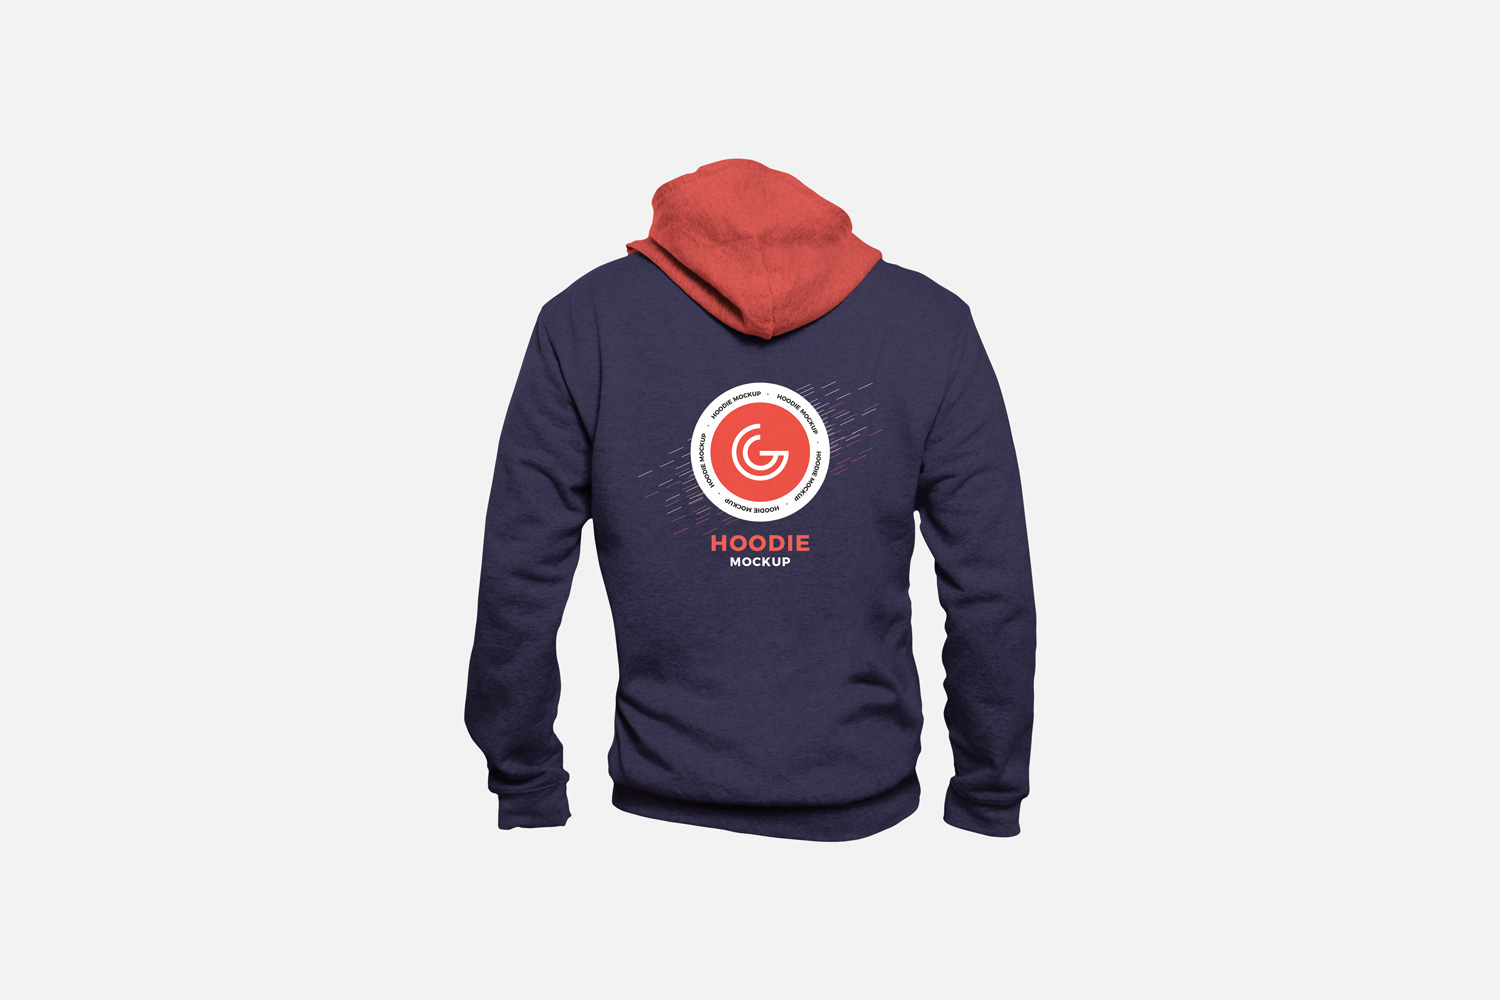 Download Free-Mens-Hoodie-Back-Mockup-PSD.jpg.pagespeed.ce.Z9b56m0hQT